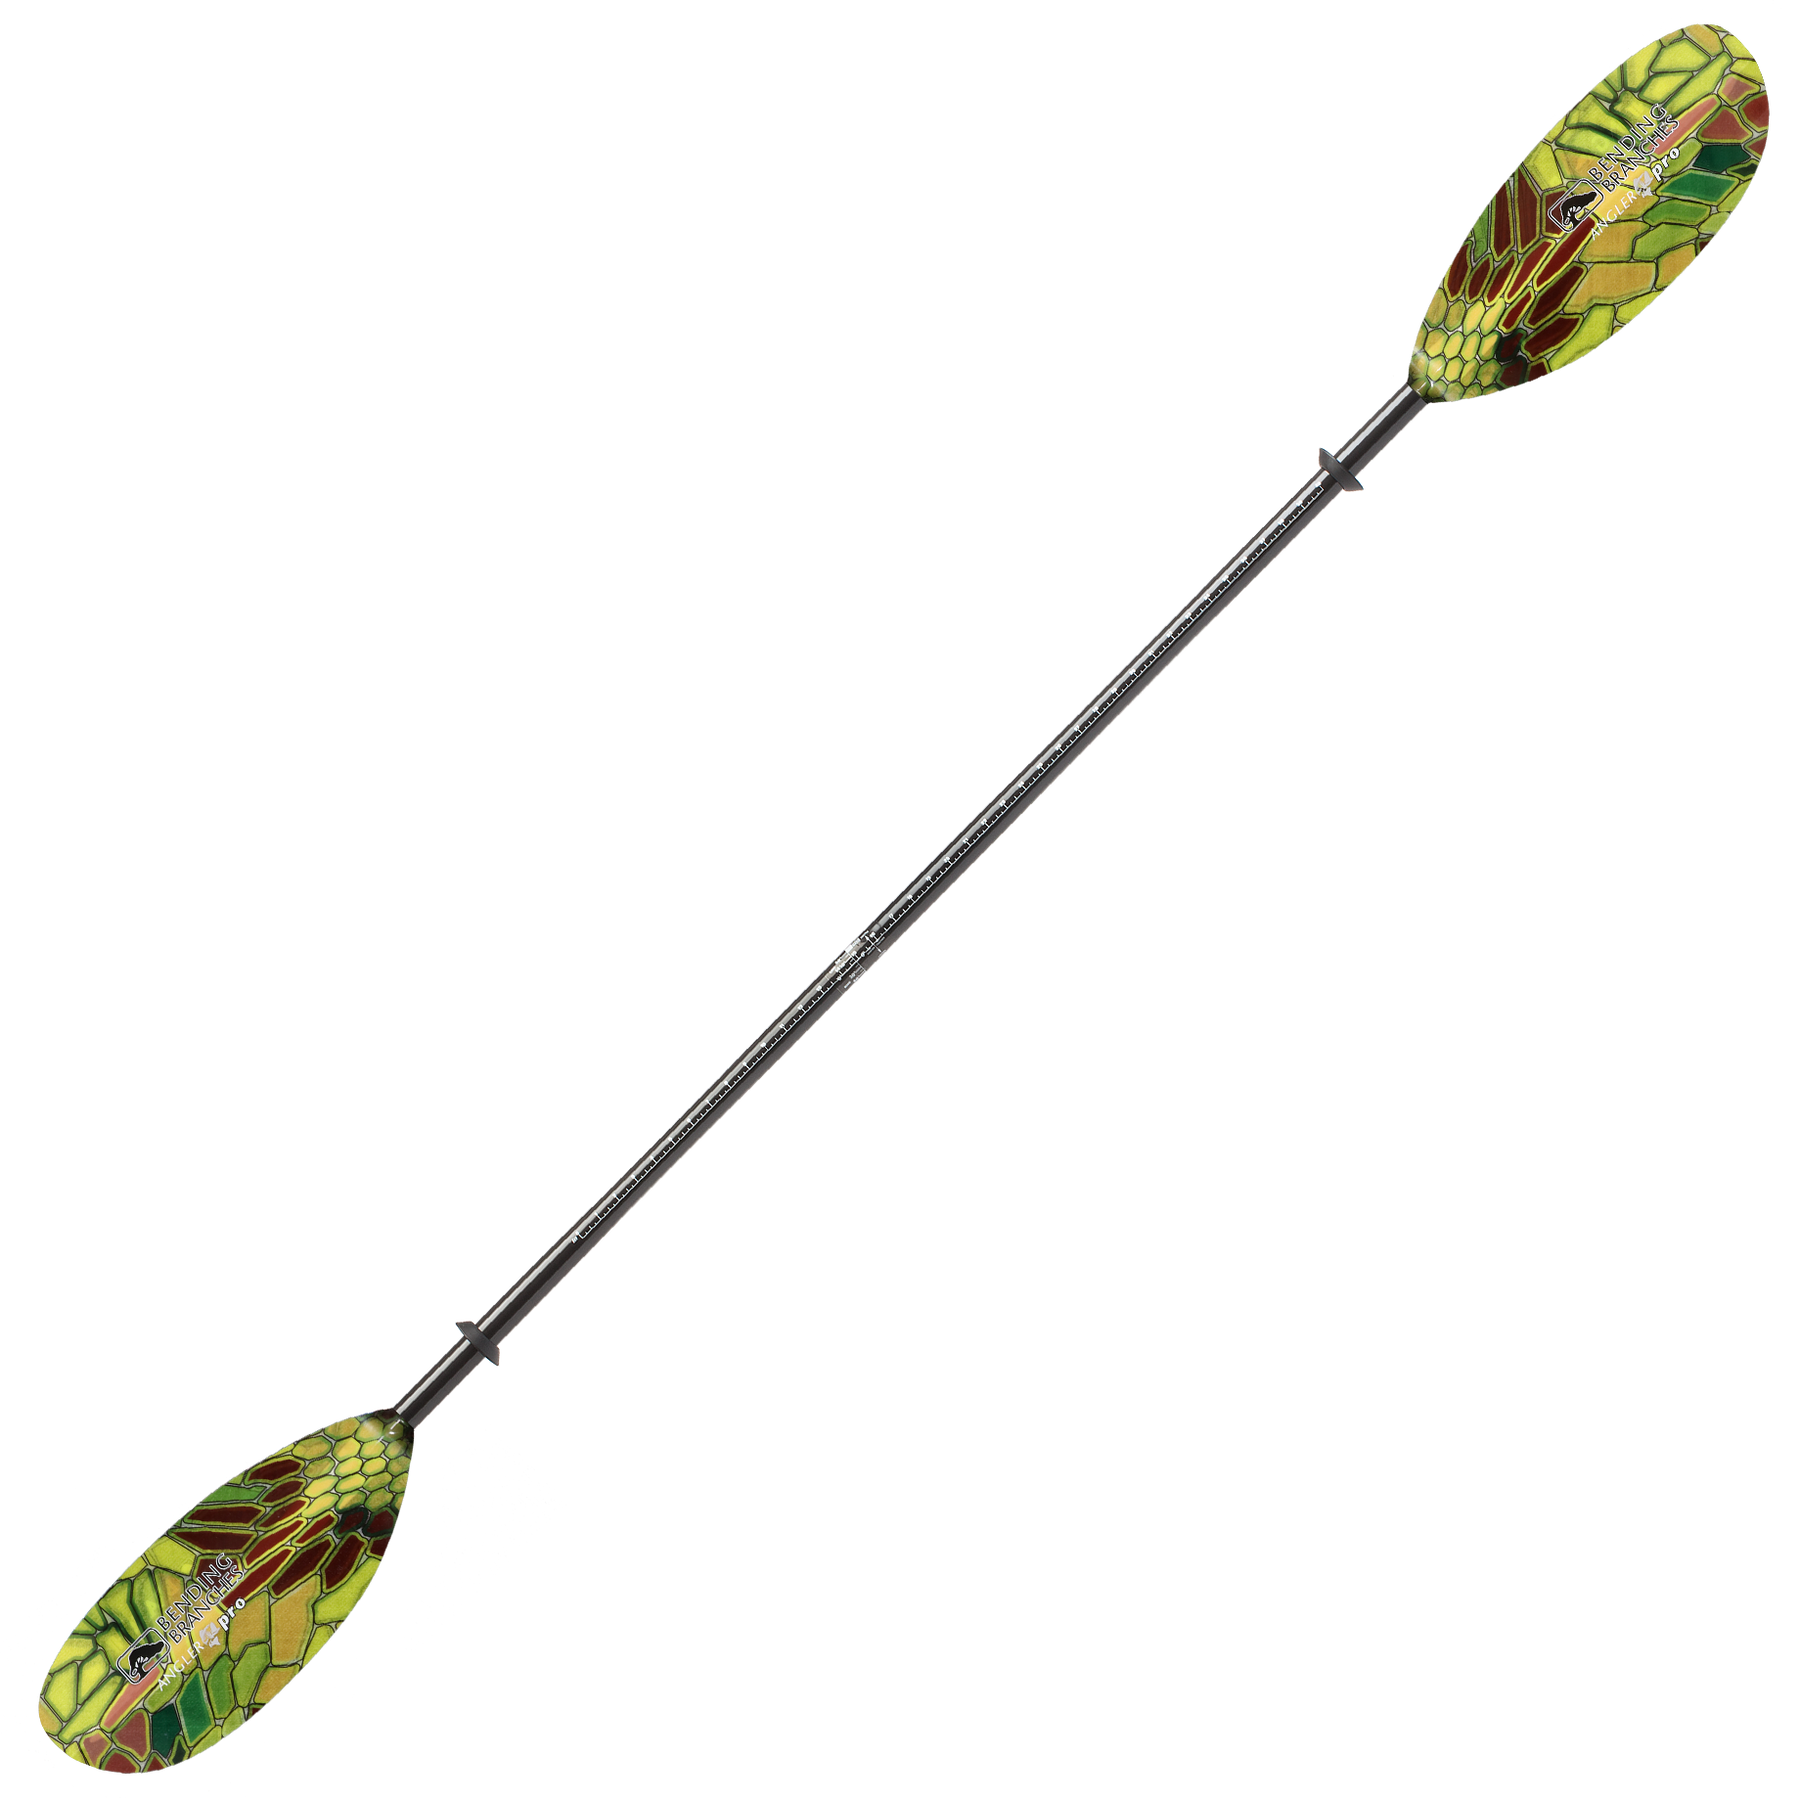 Bending Branches Angler Pro